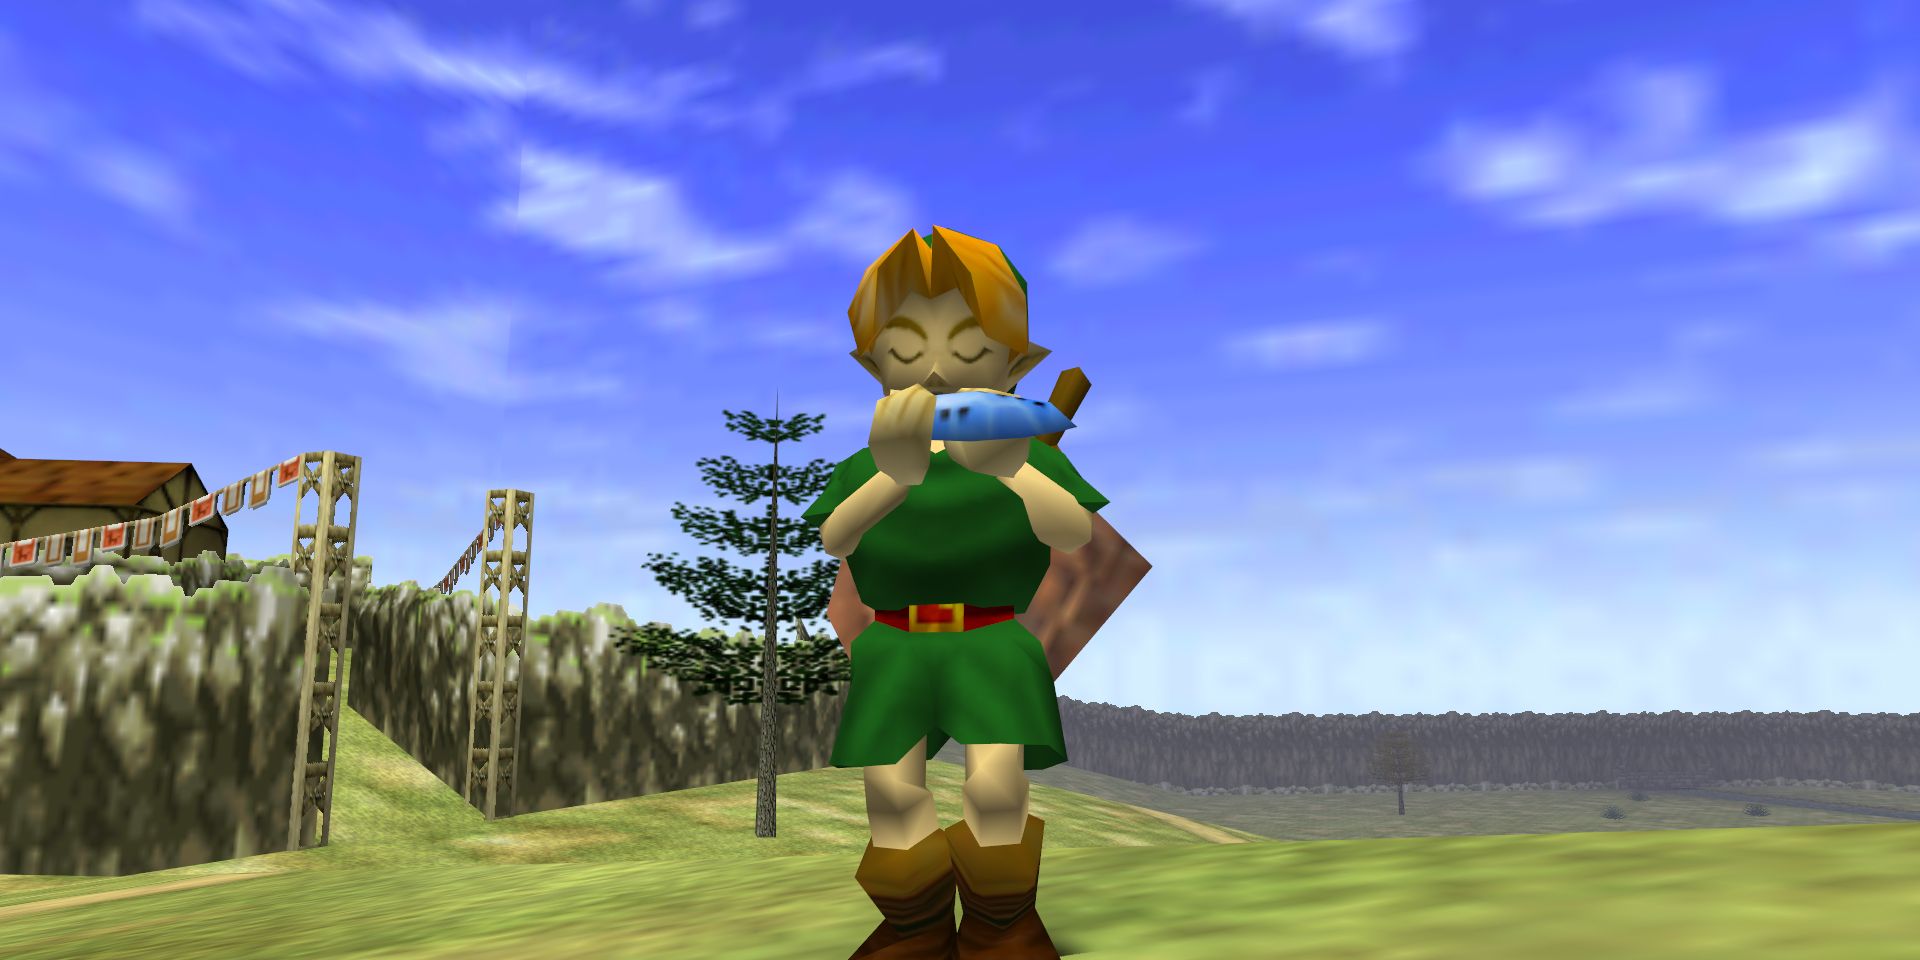 Link playing the Ocarina in The Legend of Zelda Ocarina of Time